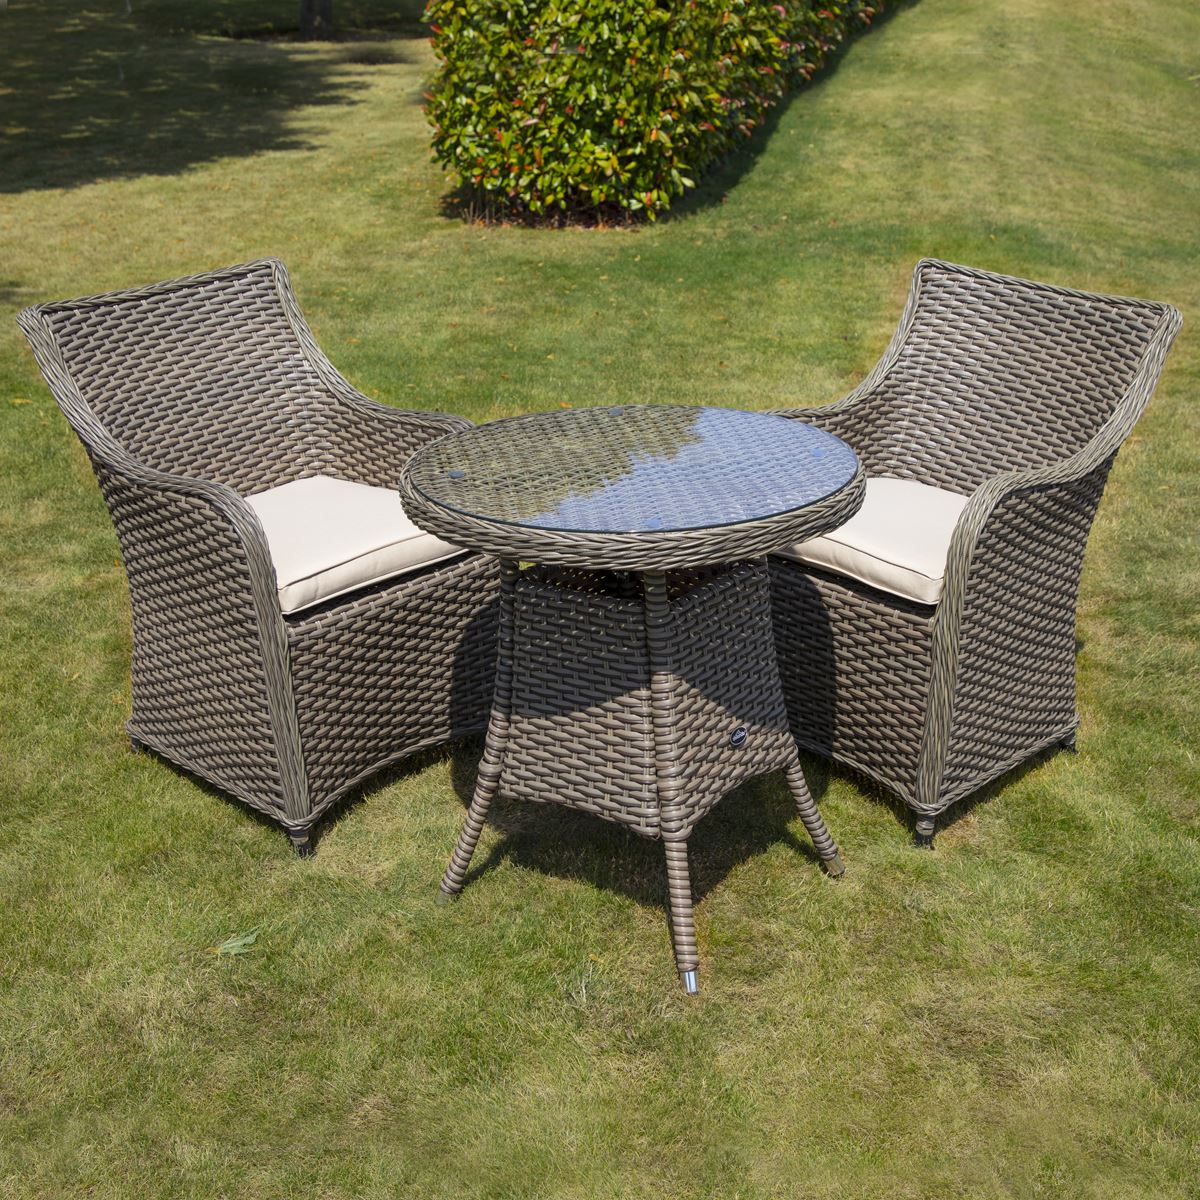 Dellonda Chester 3 Piece Rattan Wicker Outdoor Dining Set with Tempered Glass Table Top, Brown